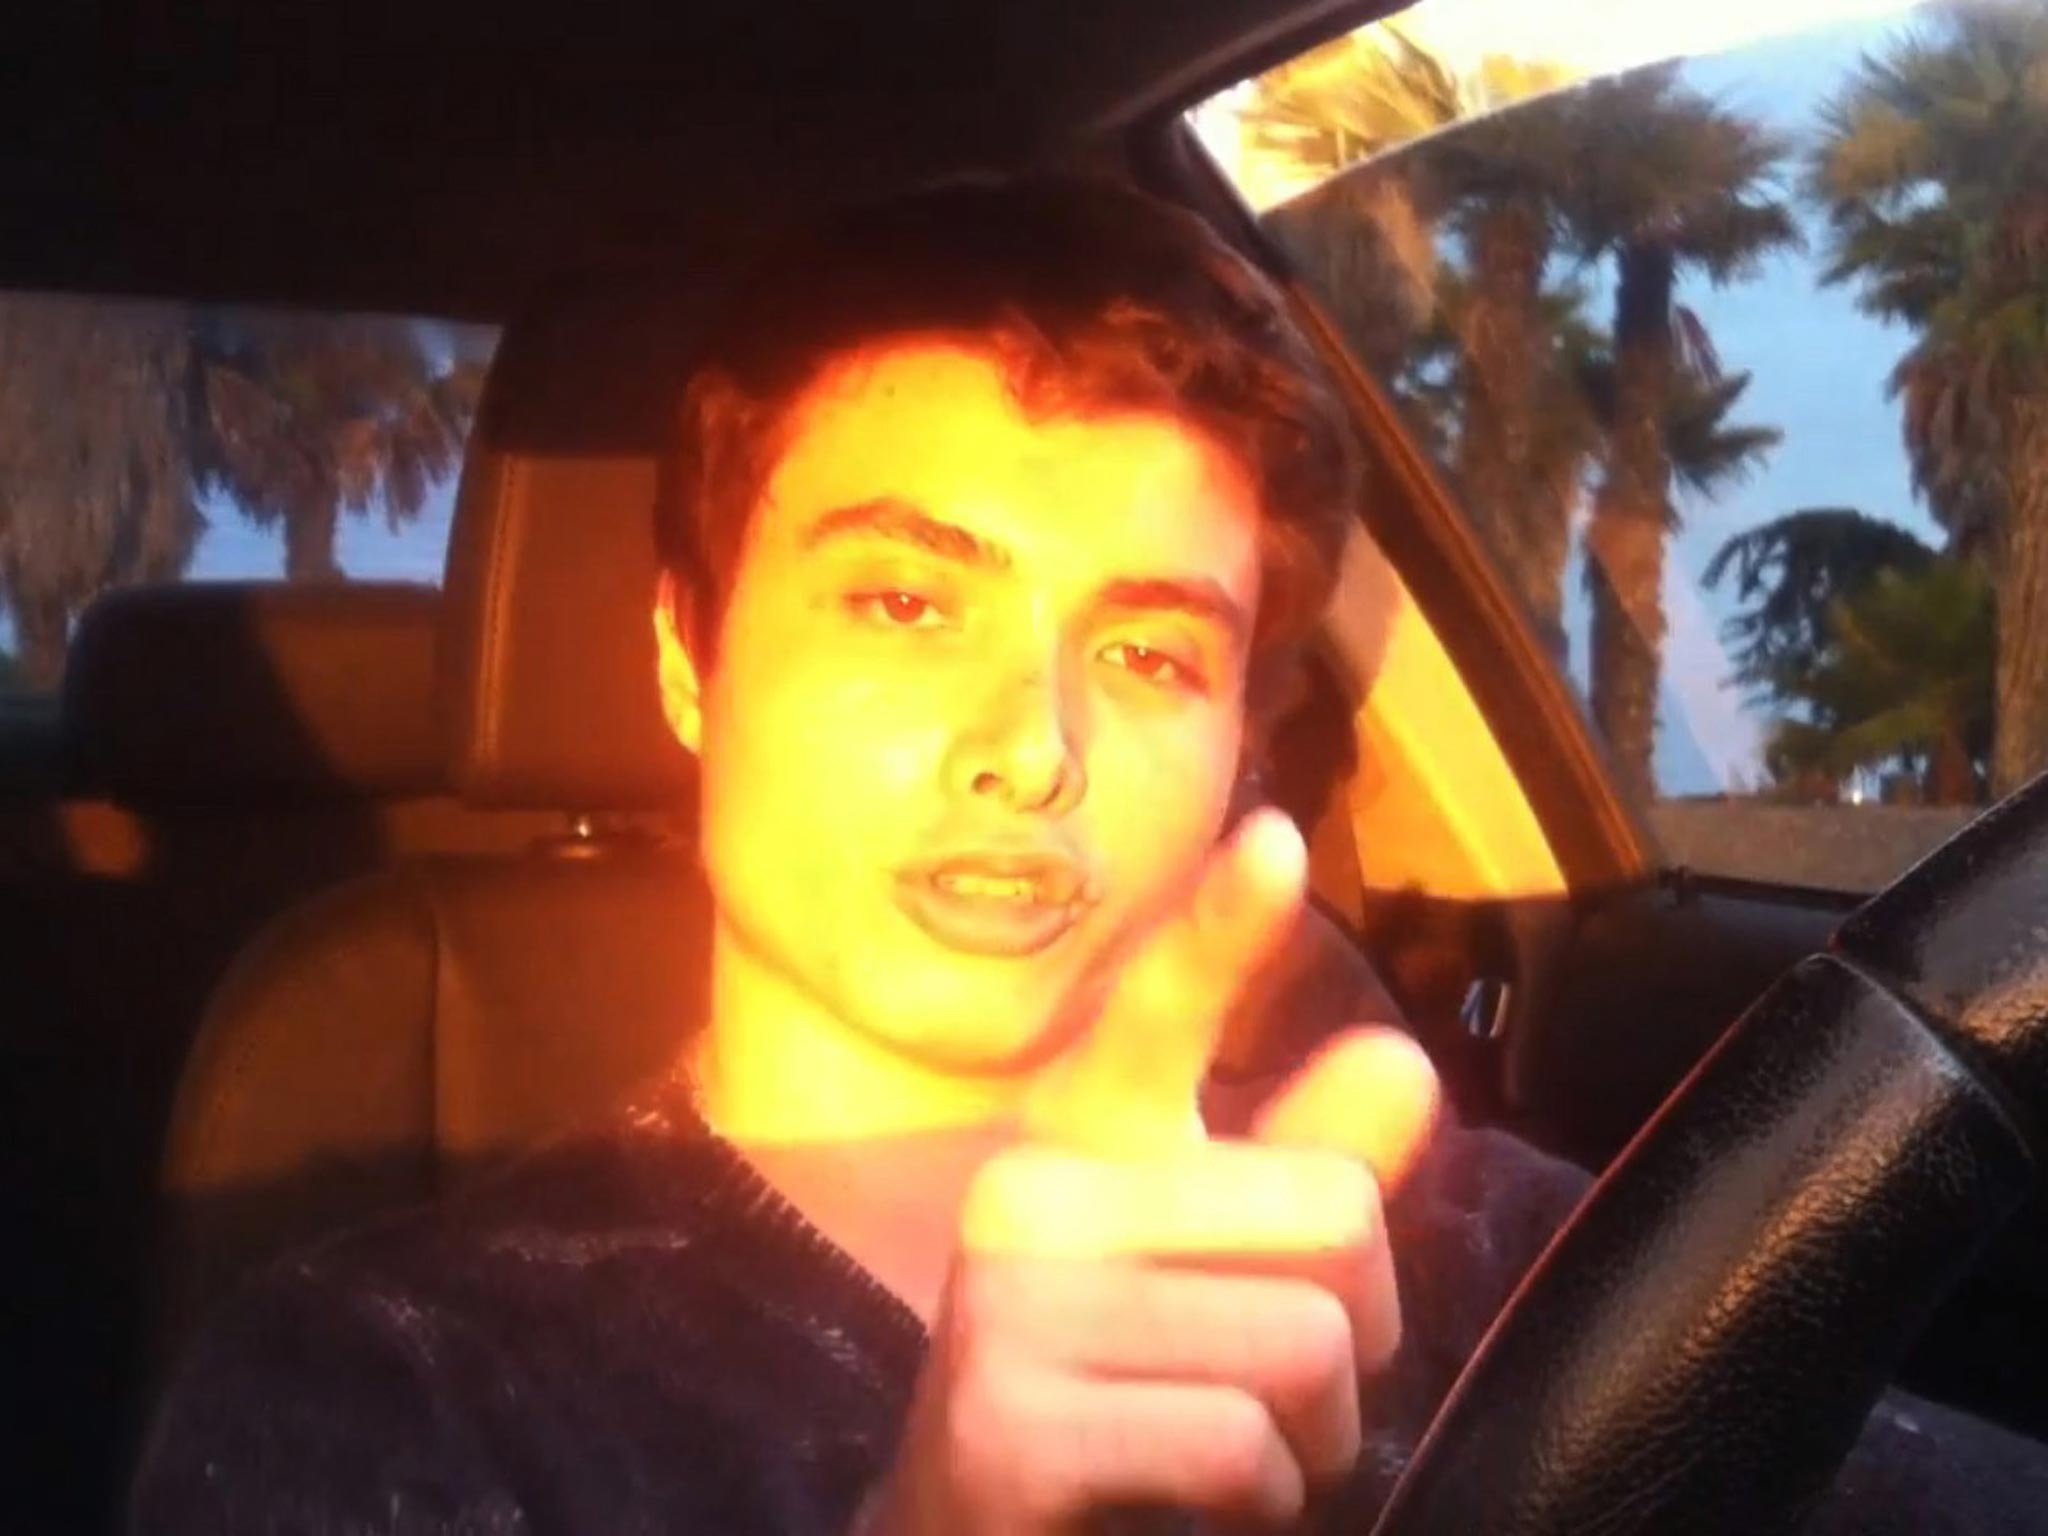 A YouTube video featuring Elliot Rodger where he speaks of his "retribution"